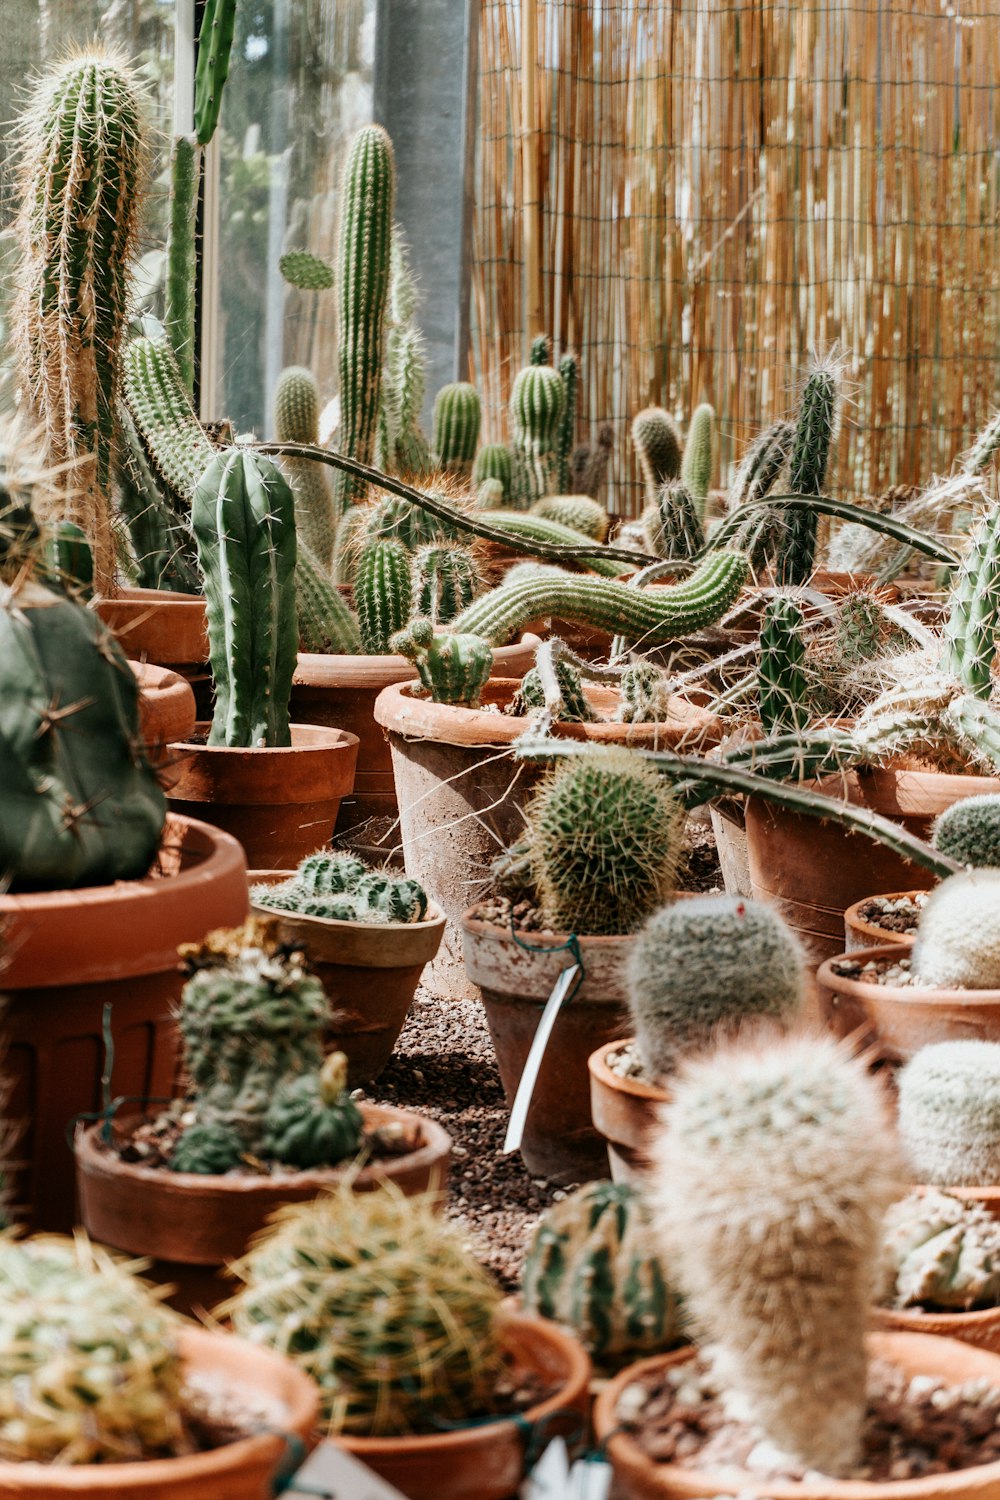 a variety of cacti and succulents in pots